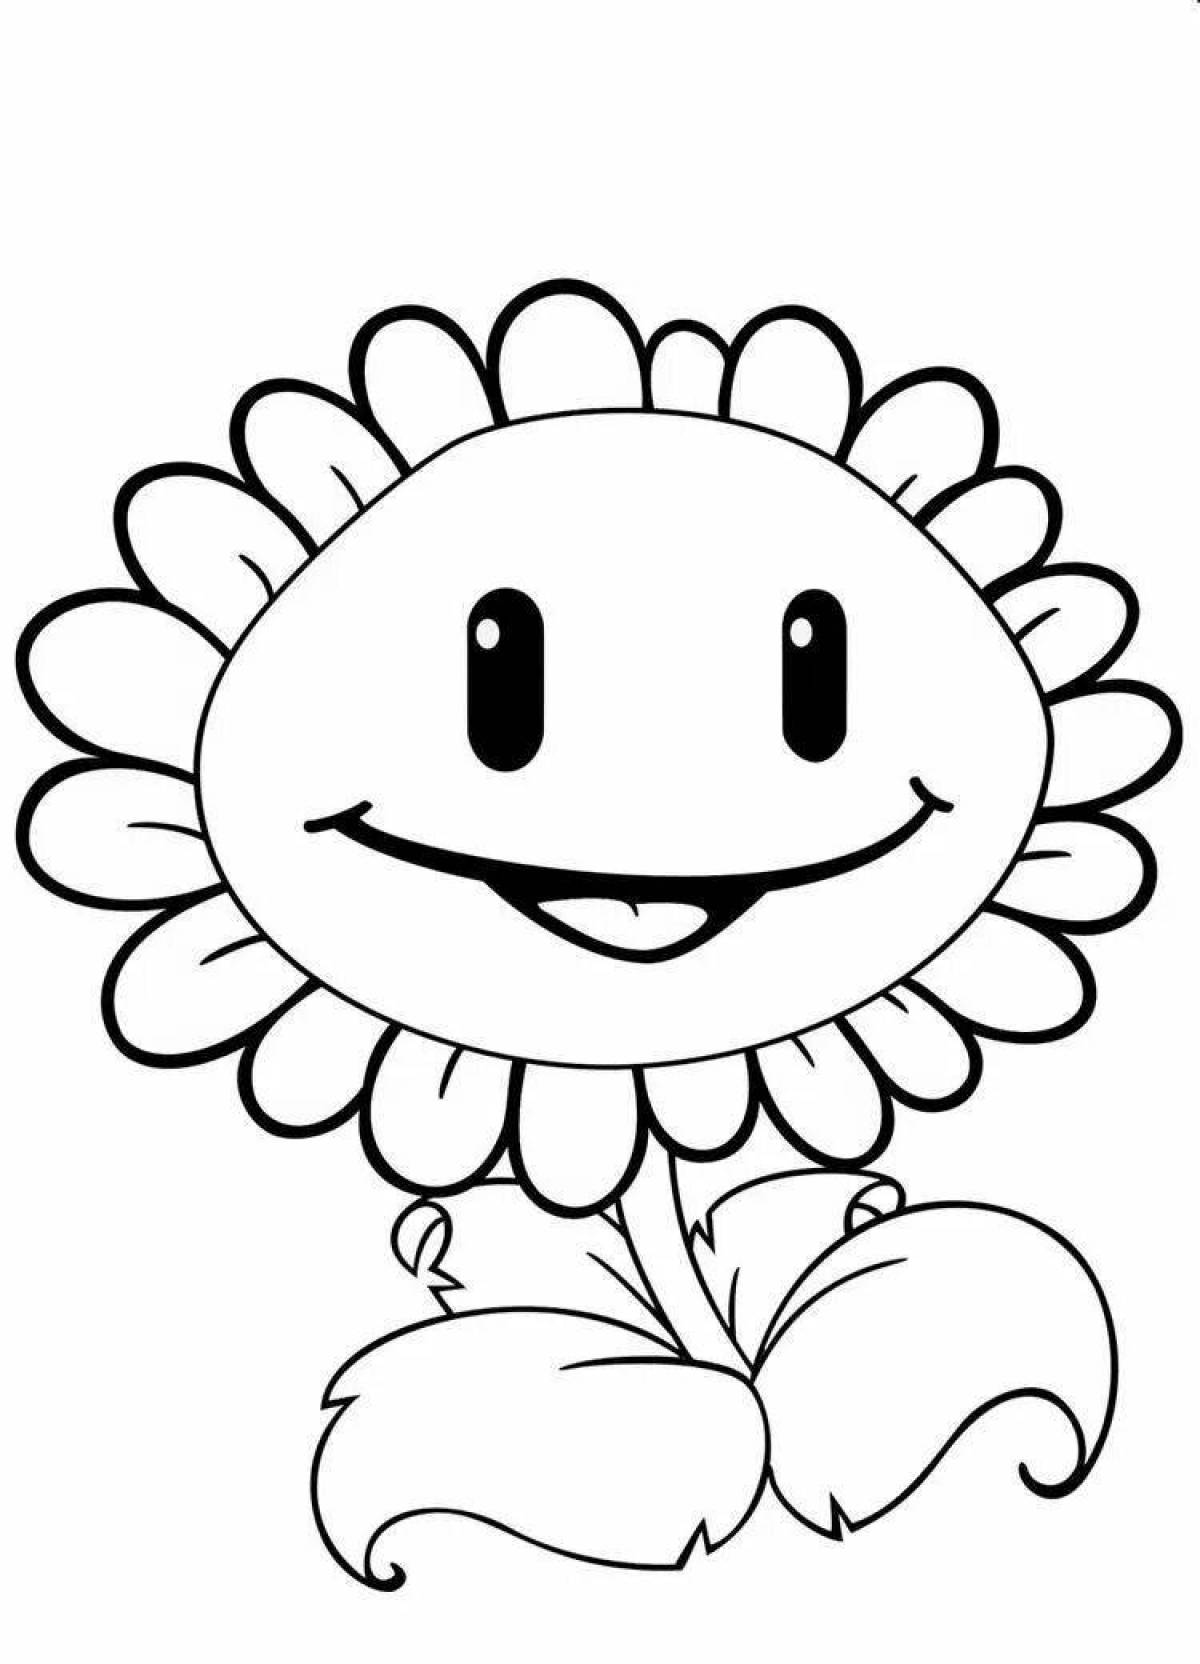 Radiant plants vs zombies coloring page